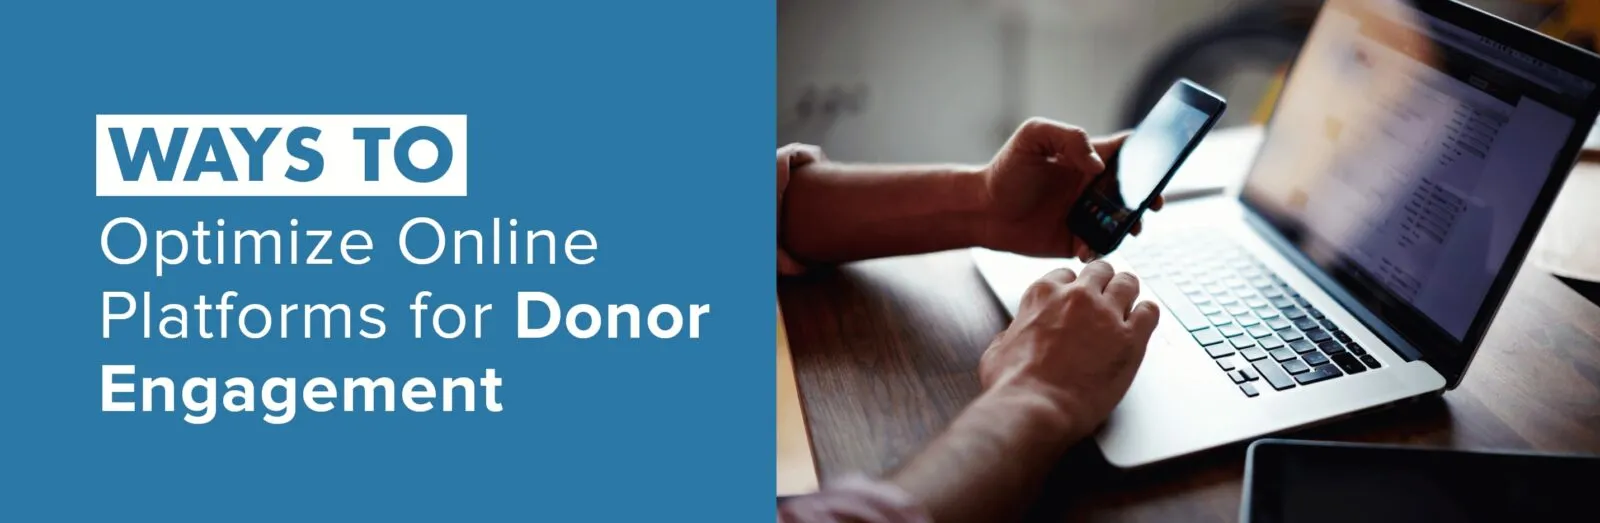 Learn more about how you can leverage your online platforms and digital tools for donor engagement.